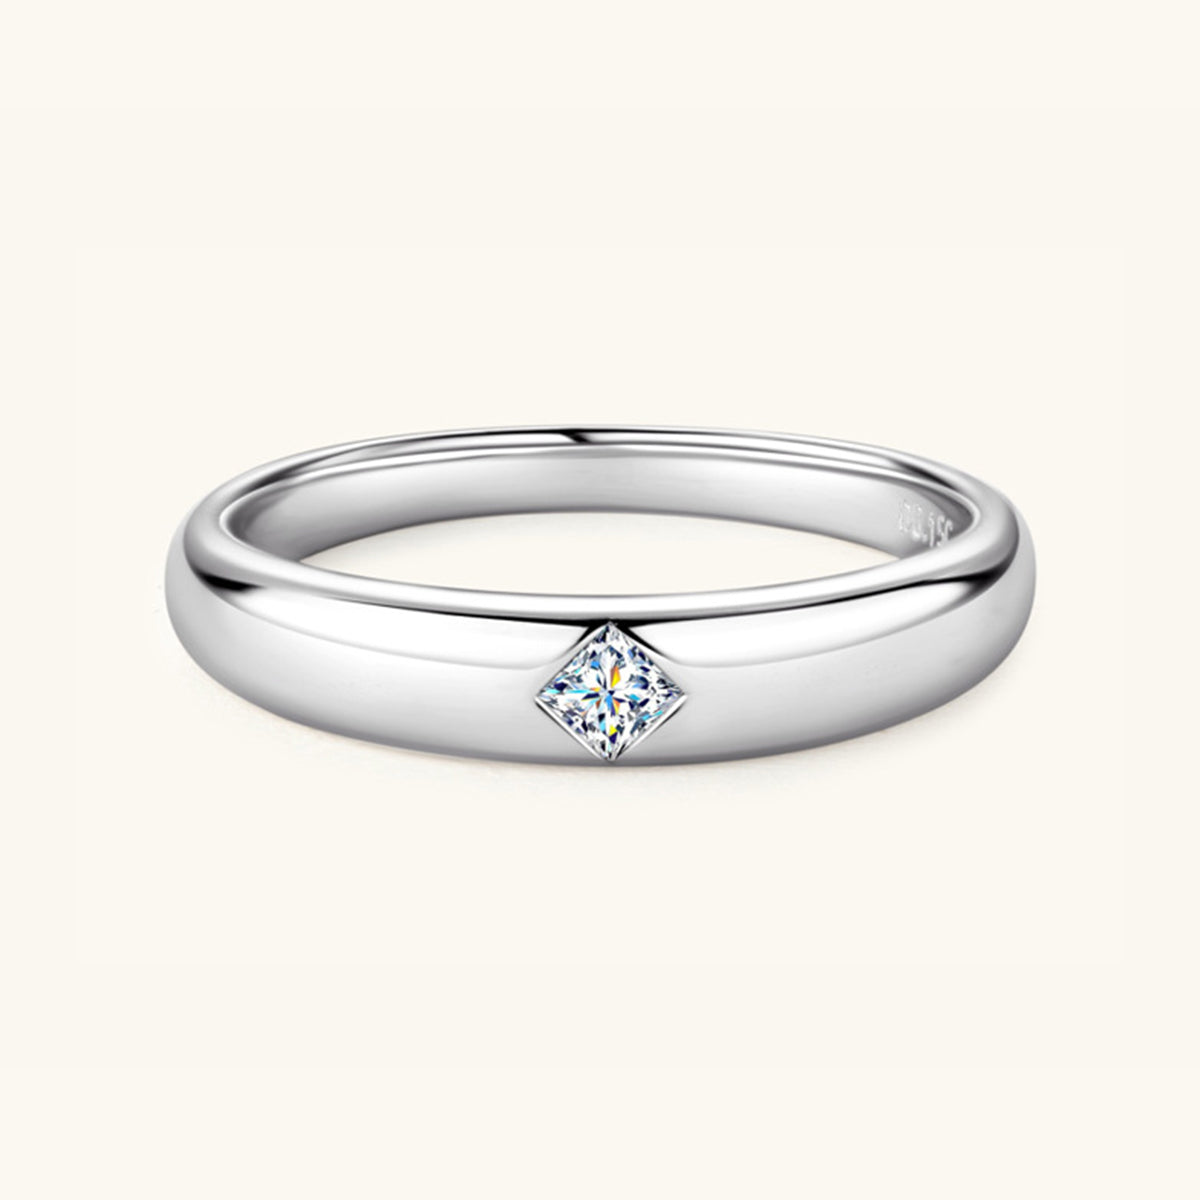 Less Is More 925 Sterling Silver Inlaid Moissanite Ring